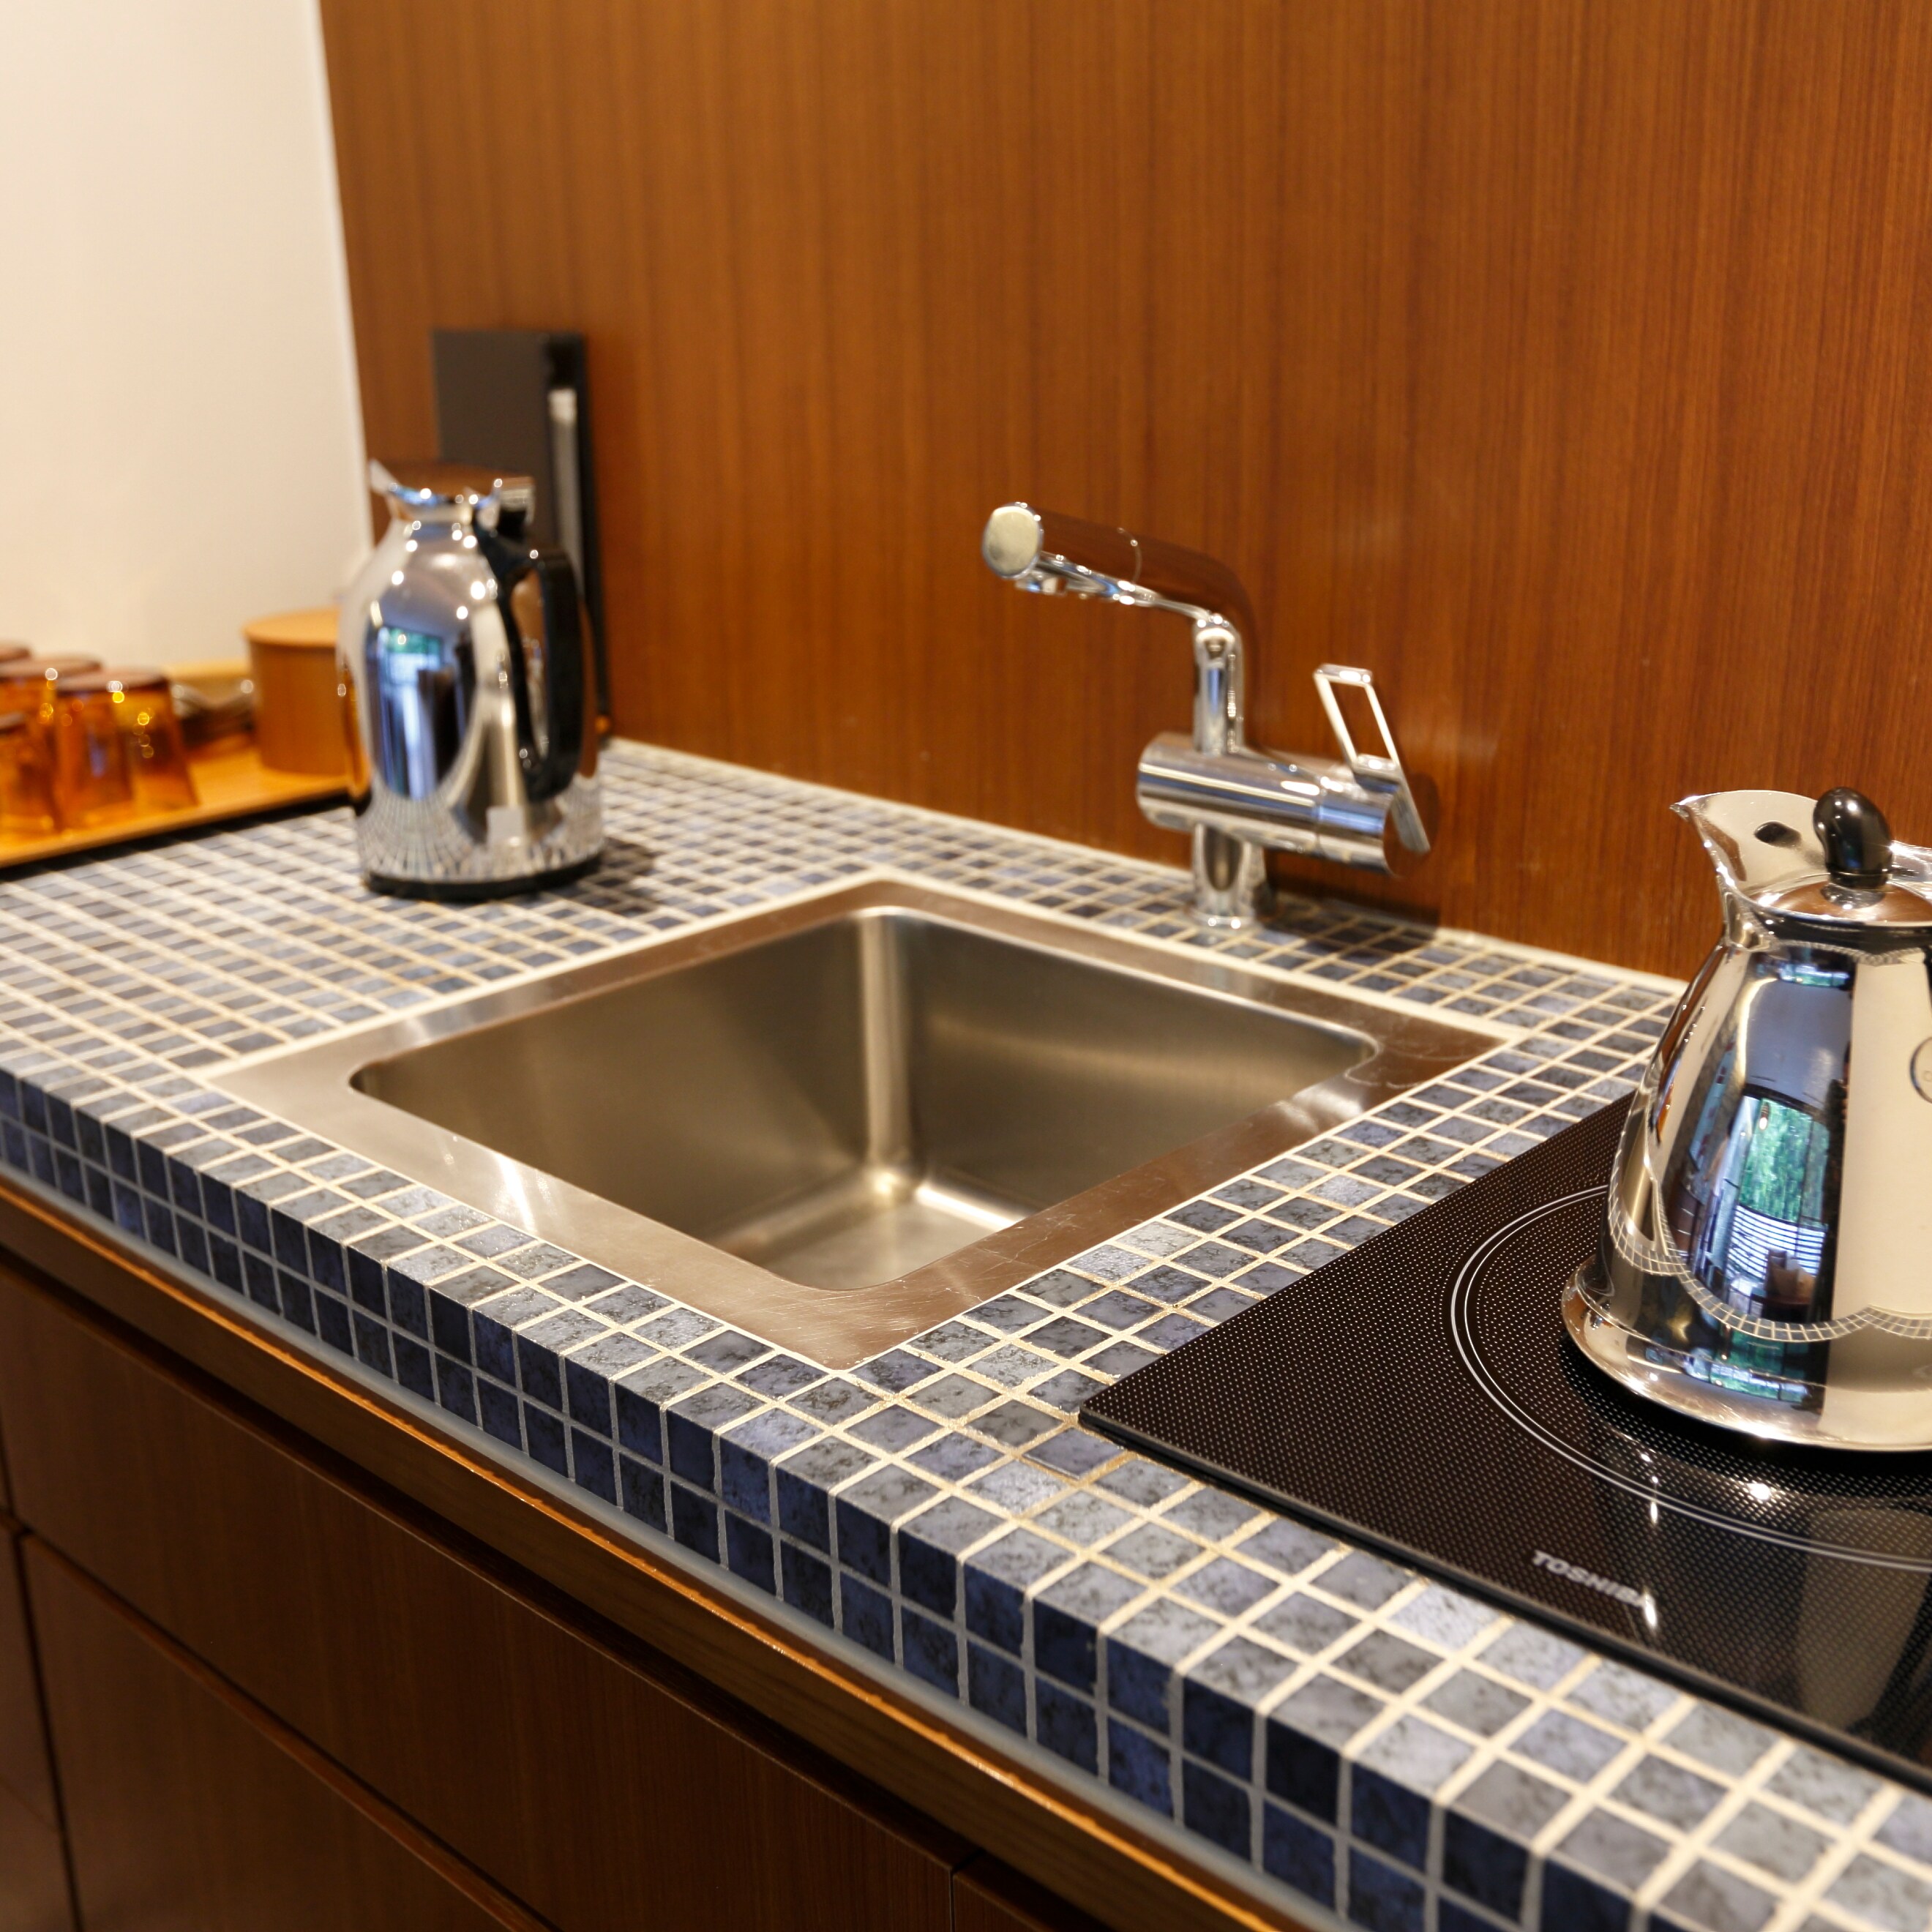 [Room equipment] All rooms are equipped with a kitchenette that can also serve doggy tableware and simple dishes.